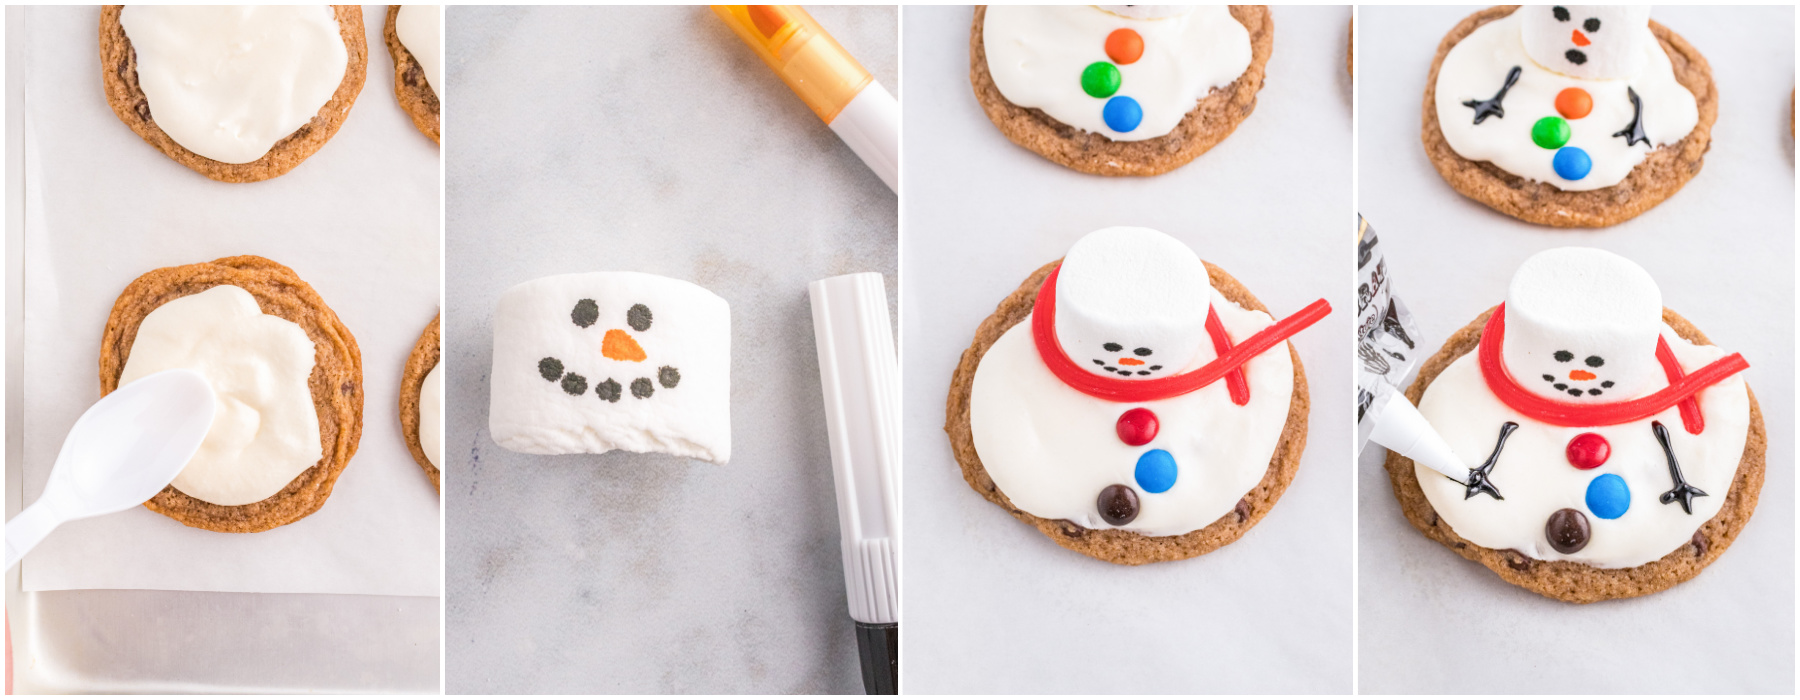 A series of photos showing how to decorate Melted Snowman Cookies.